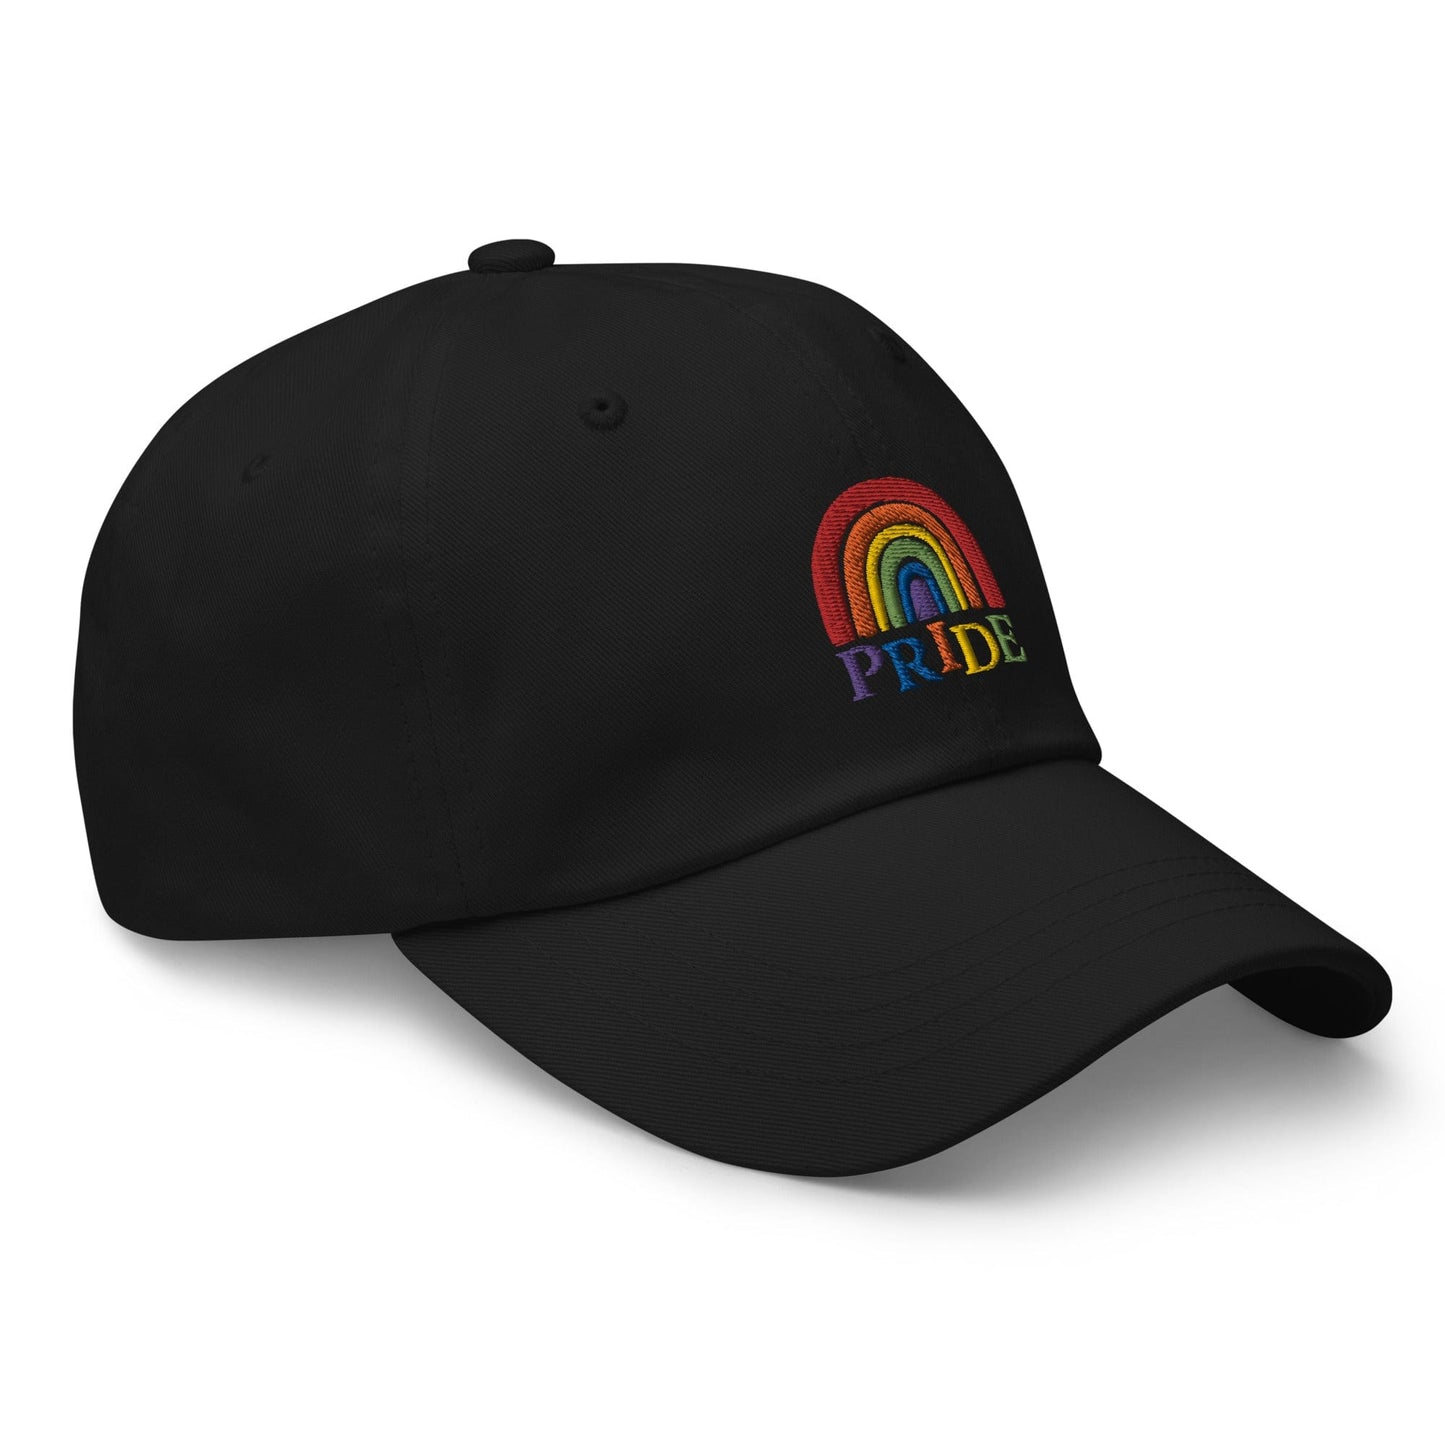 embroidered-dad-hat-black-right-front-